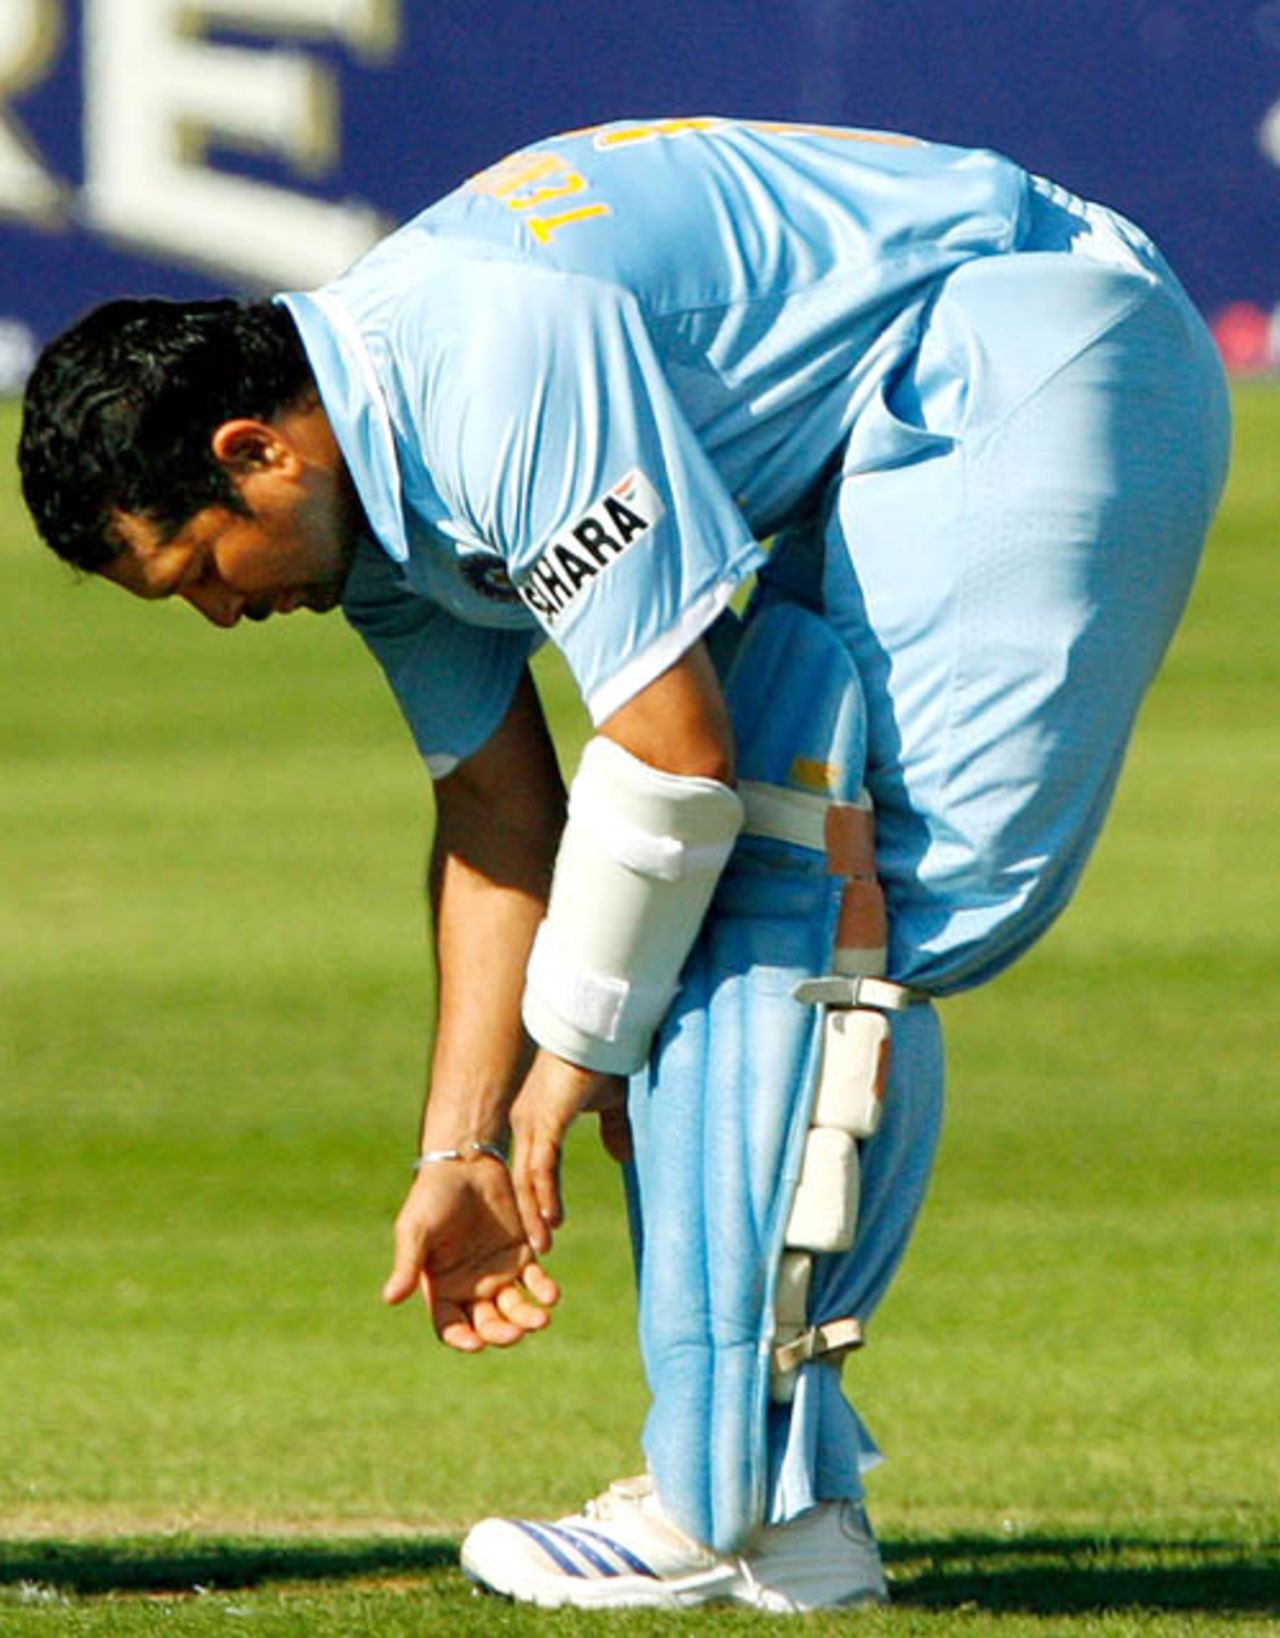 Sachin Tendulkar suffered from cramps mid-way through his innings of 99, England v India, 2nd ODI, Bristol, August 24, 2007